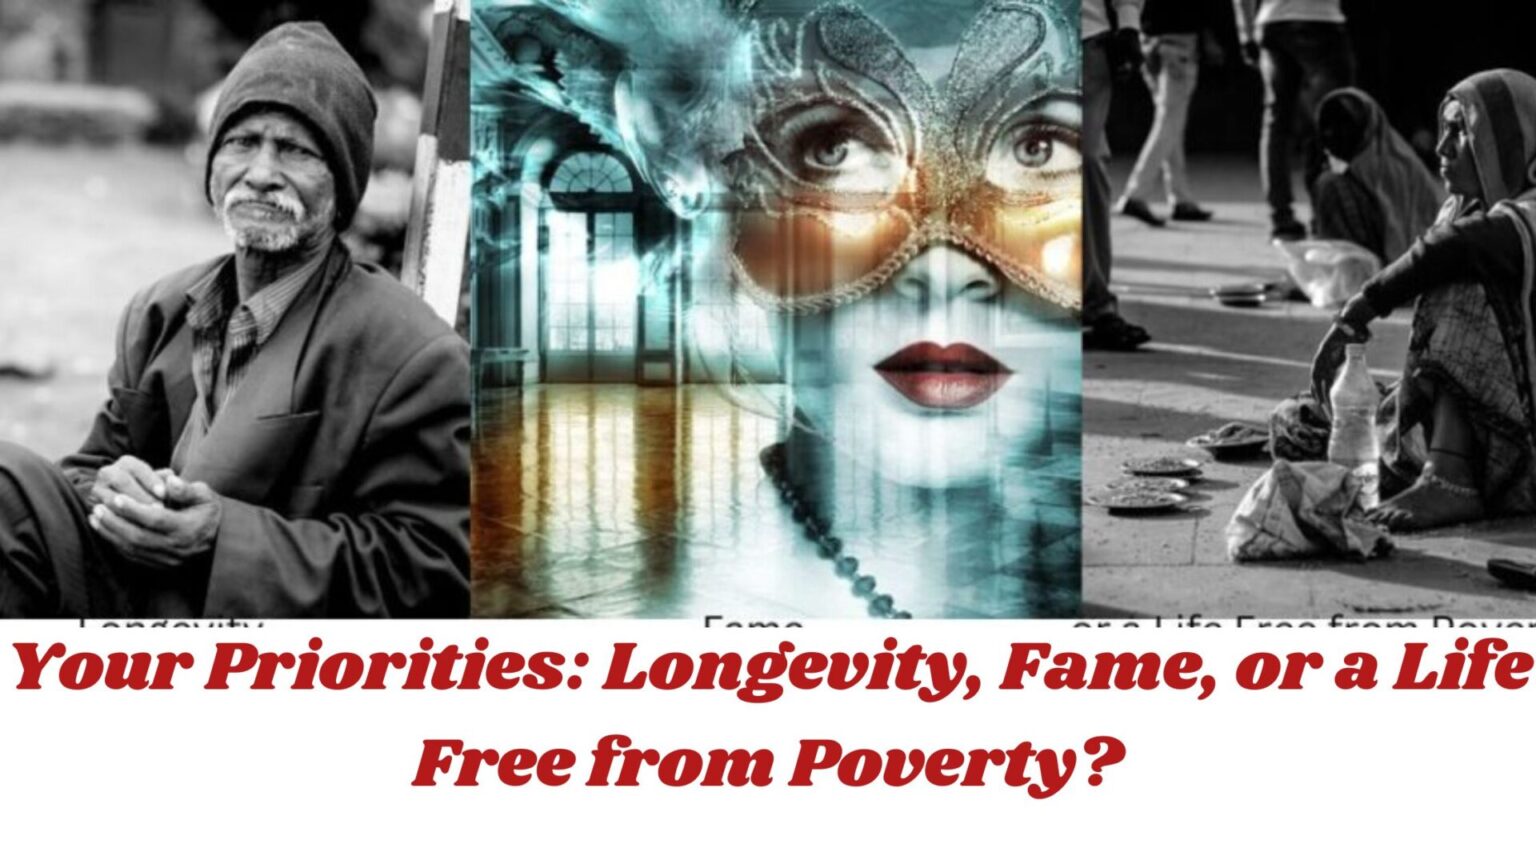 Your Priorities: Longevity, Fame, or a Life Free from Poverty?